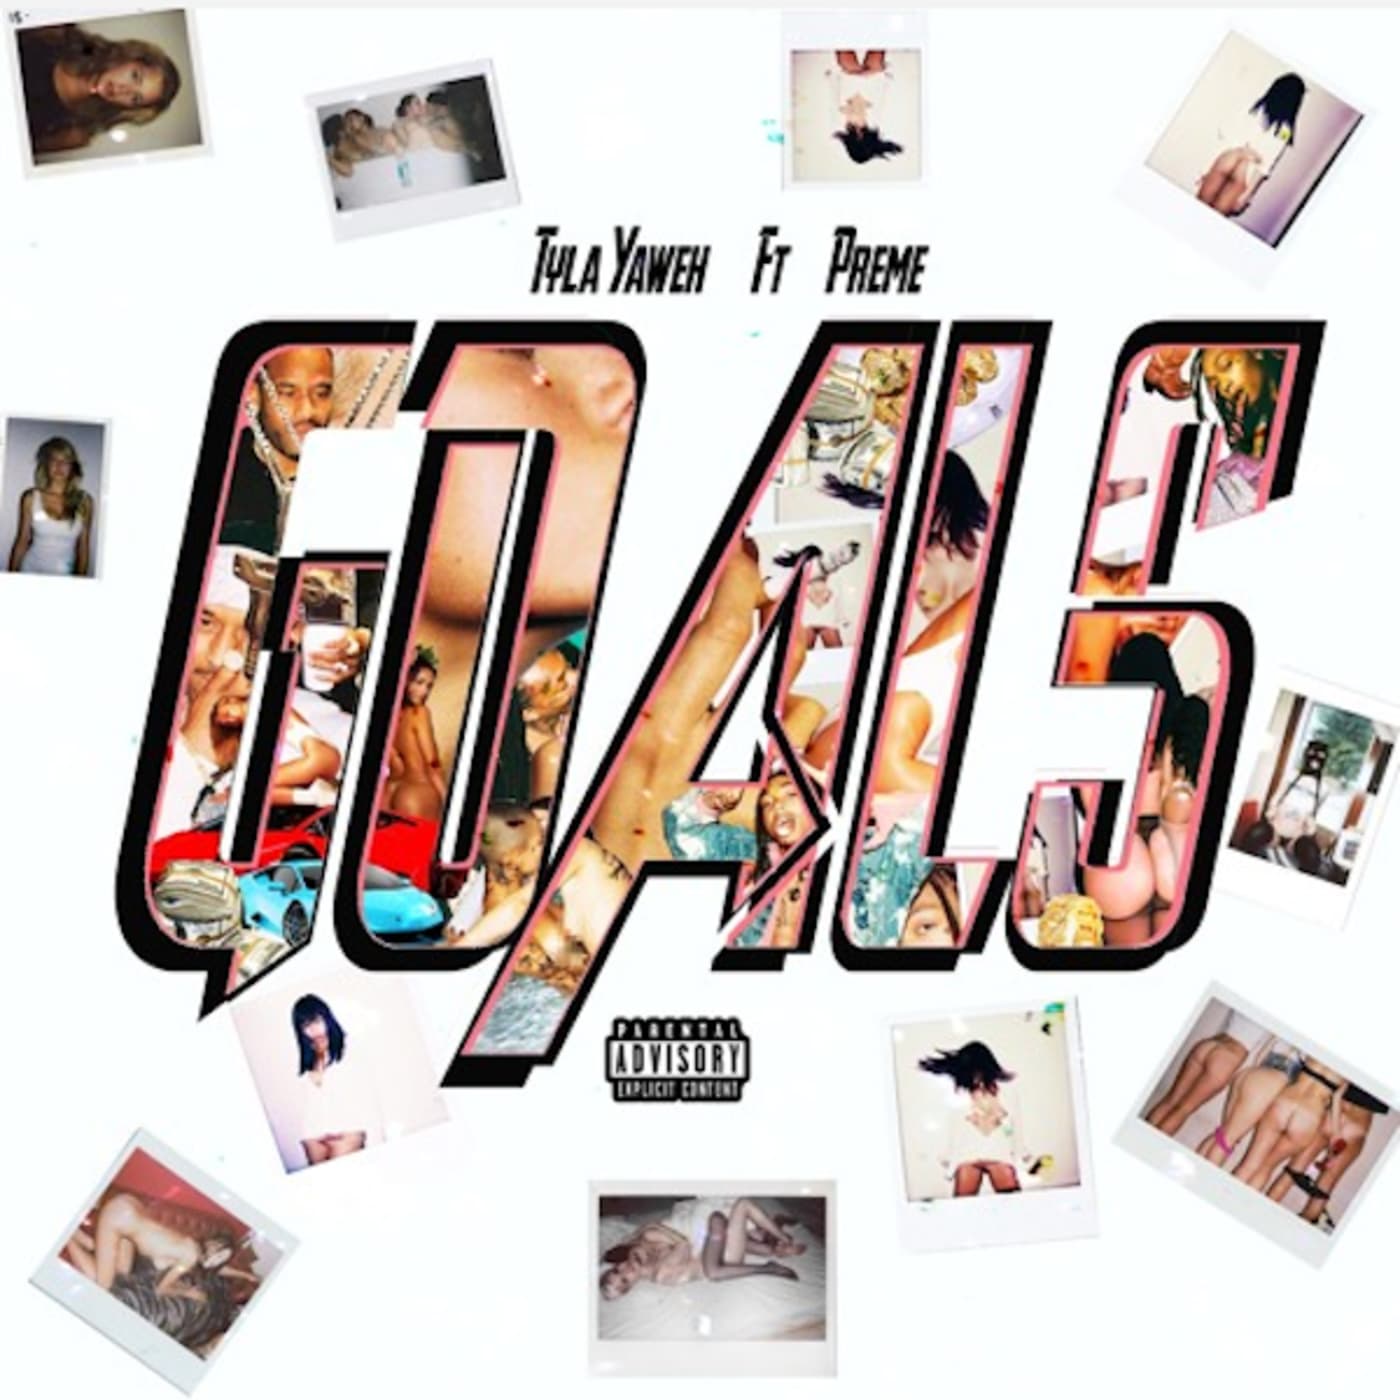 Tyla Yaweh Drops New Track "Goals" Featuring Preme.